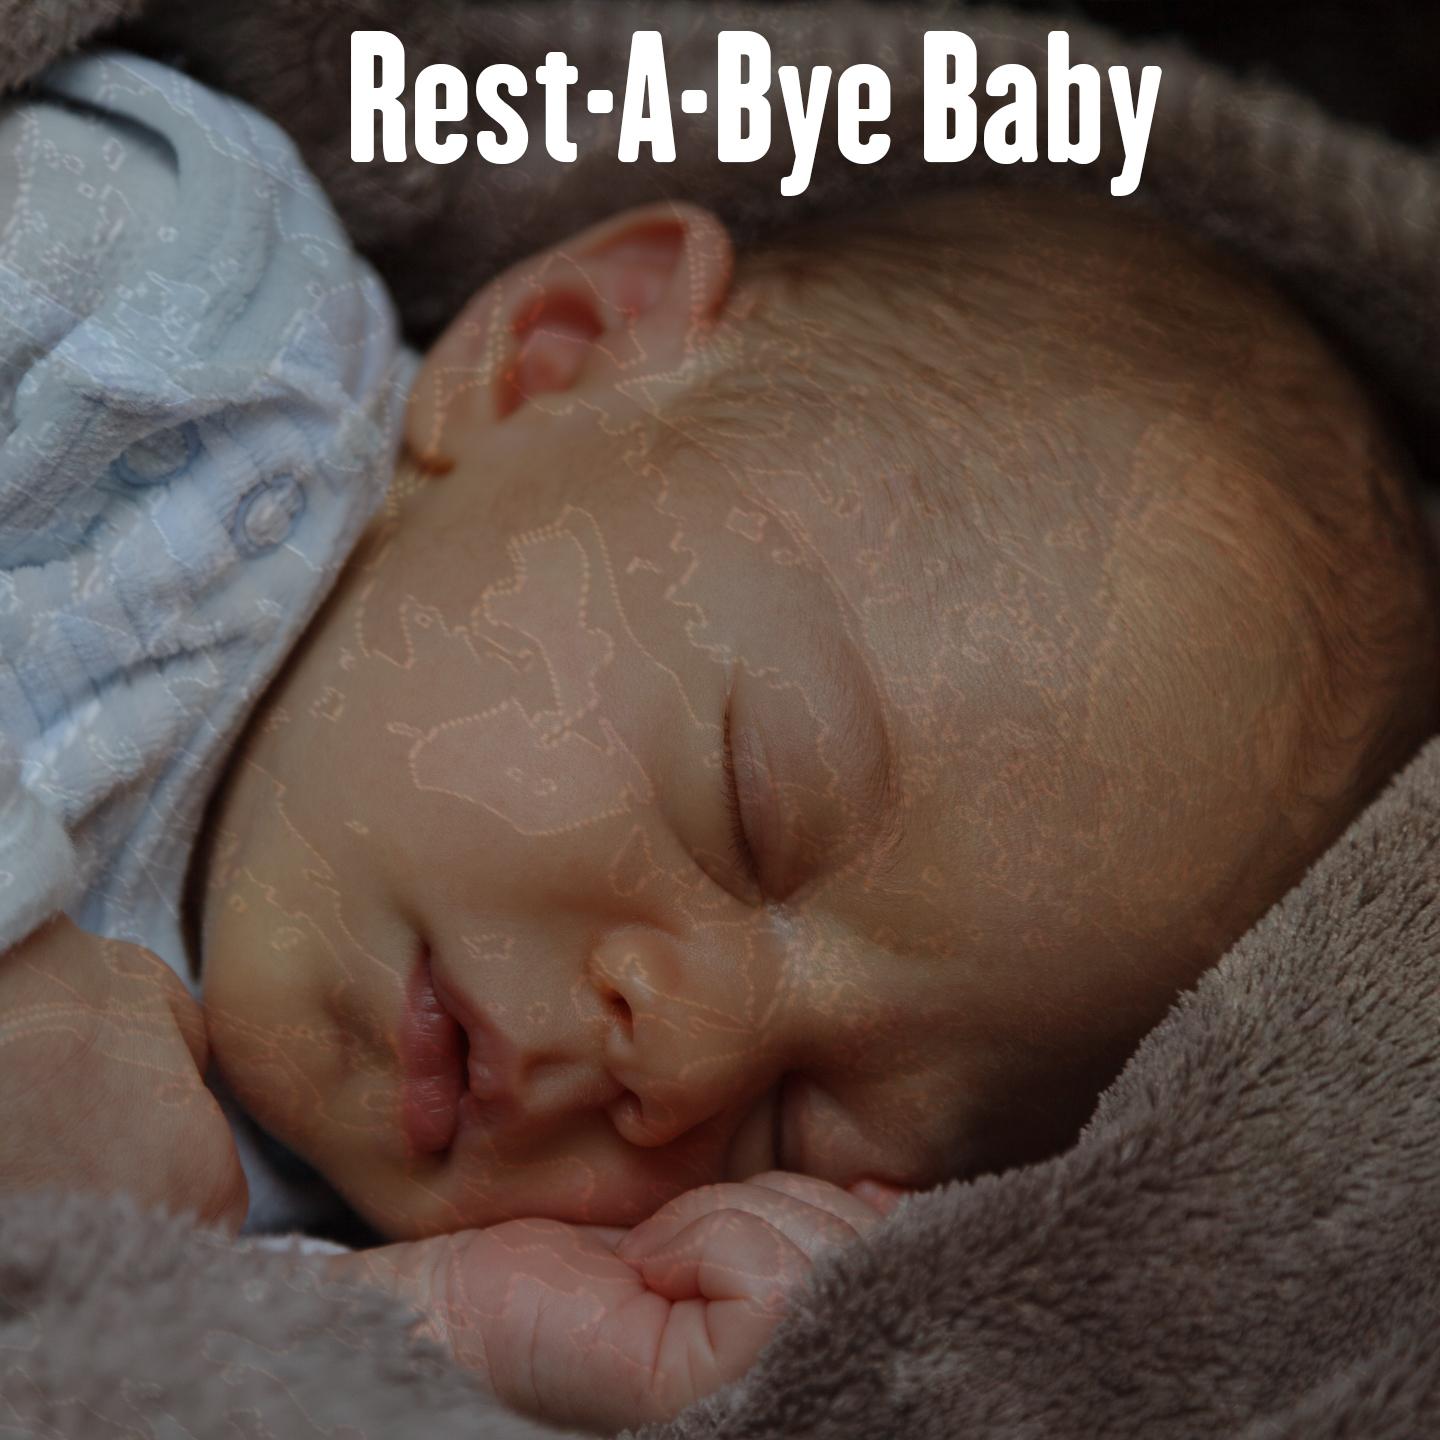 Rest-A-Bye Baby